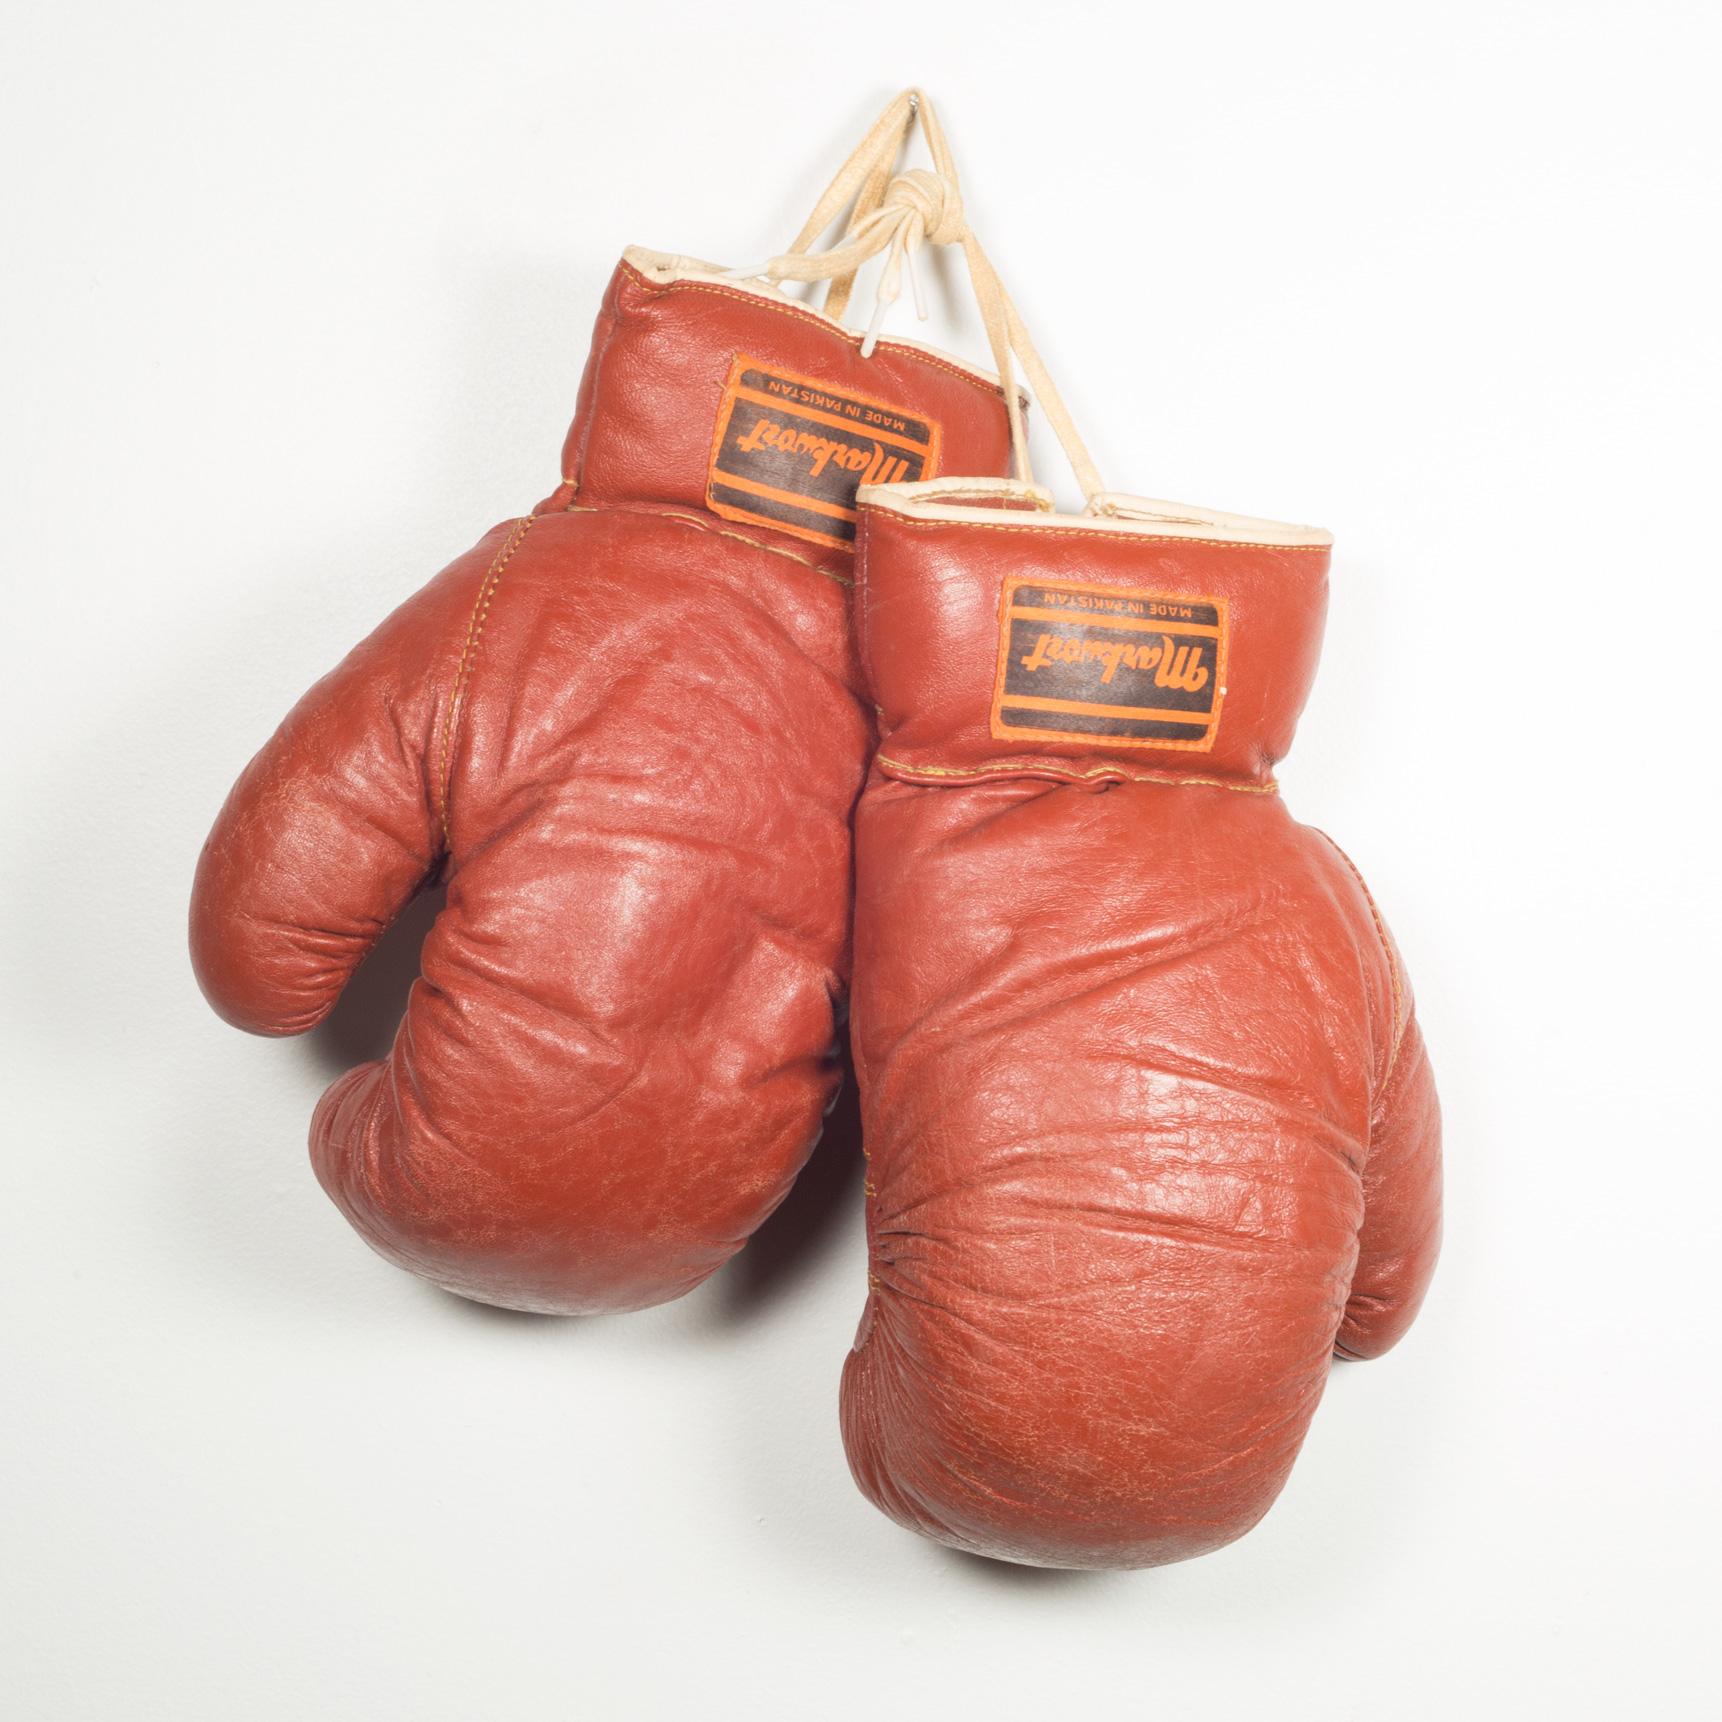 1950 boxing gloves